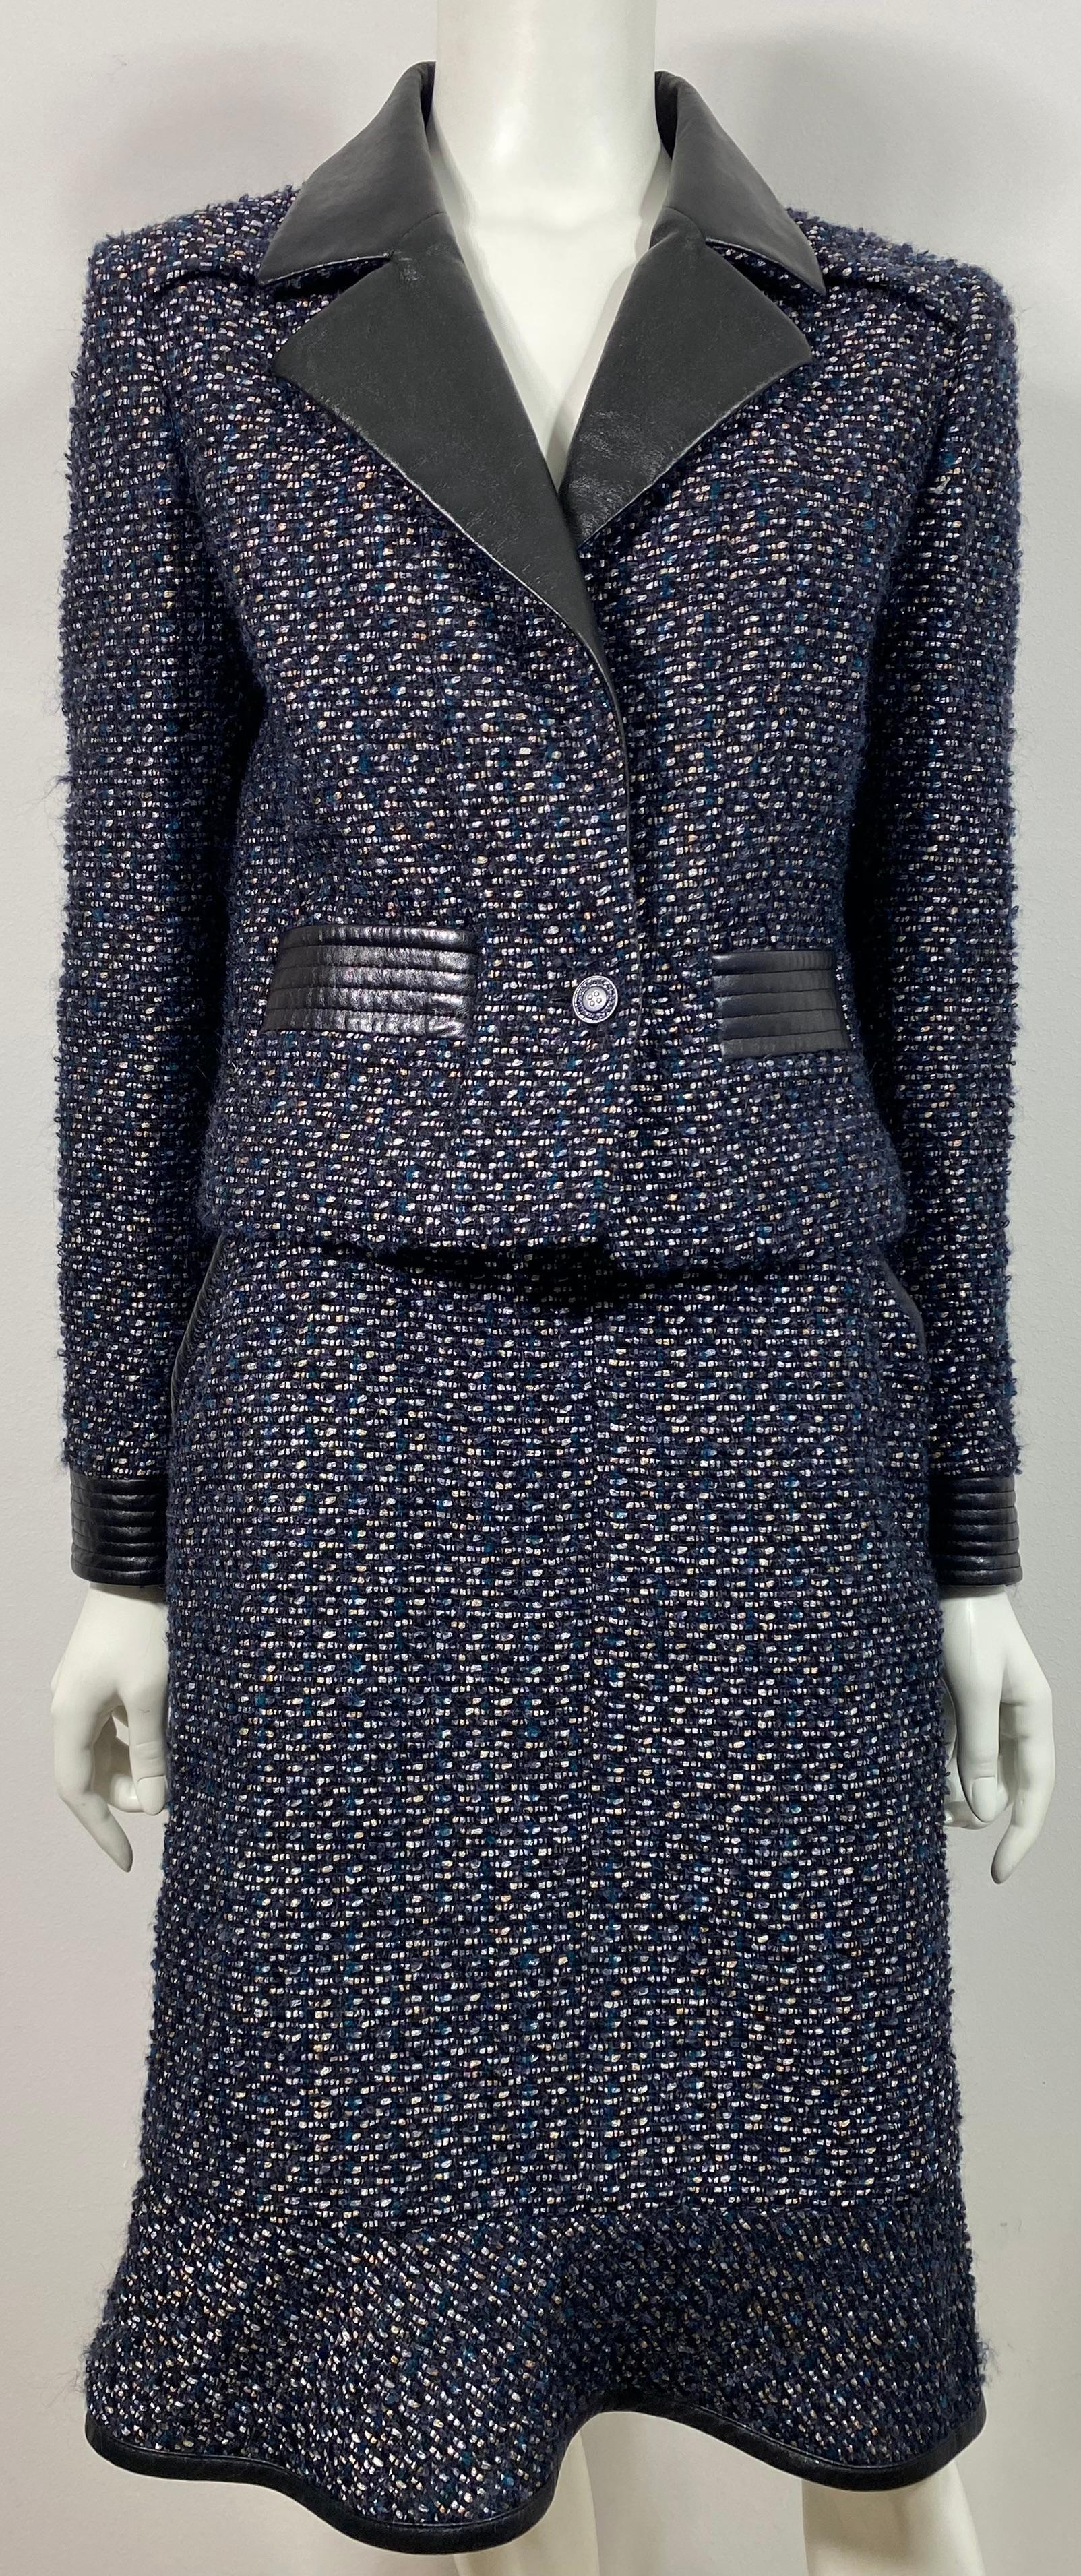 Chanel Runway Fall 2002 Navy and  Black Tweed with Metallic threading and Leather Details skirt suit -size 40 This fully lined navy, black and metallic threading wool and mohair tweed skirt suit has black leather detail throughout. The Jacket is